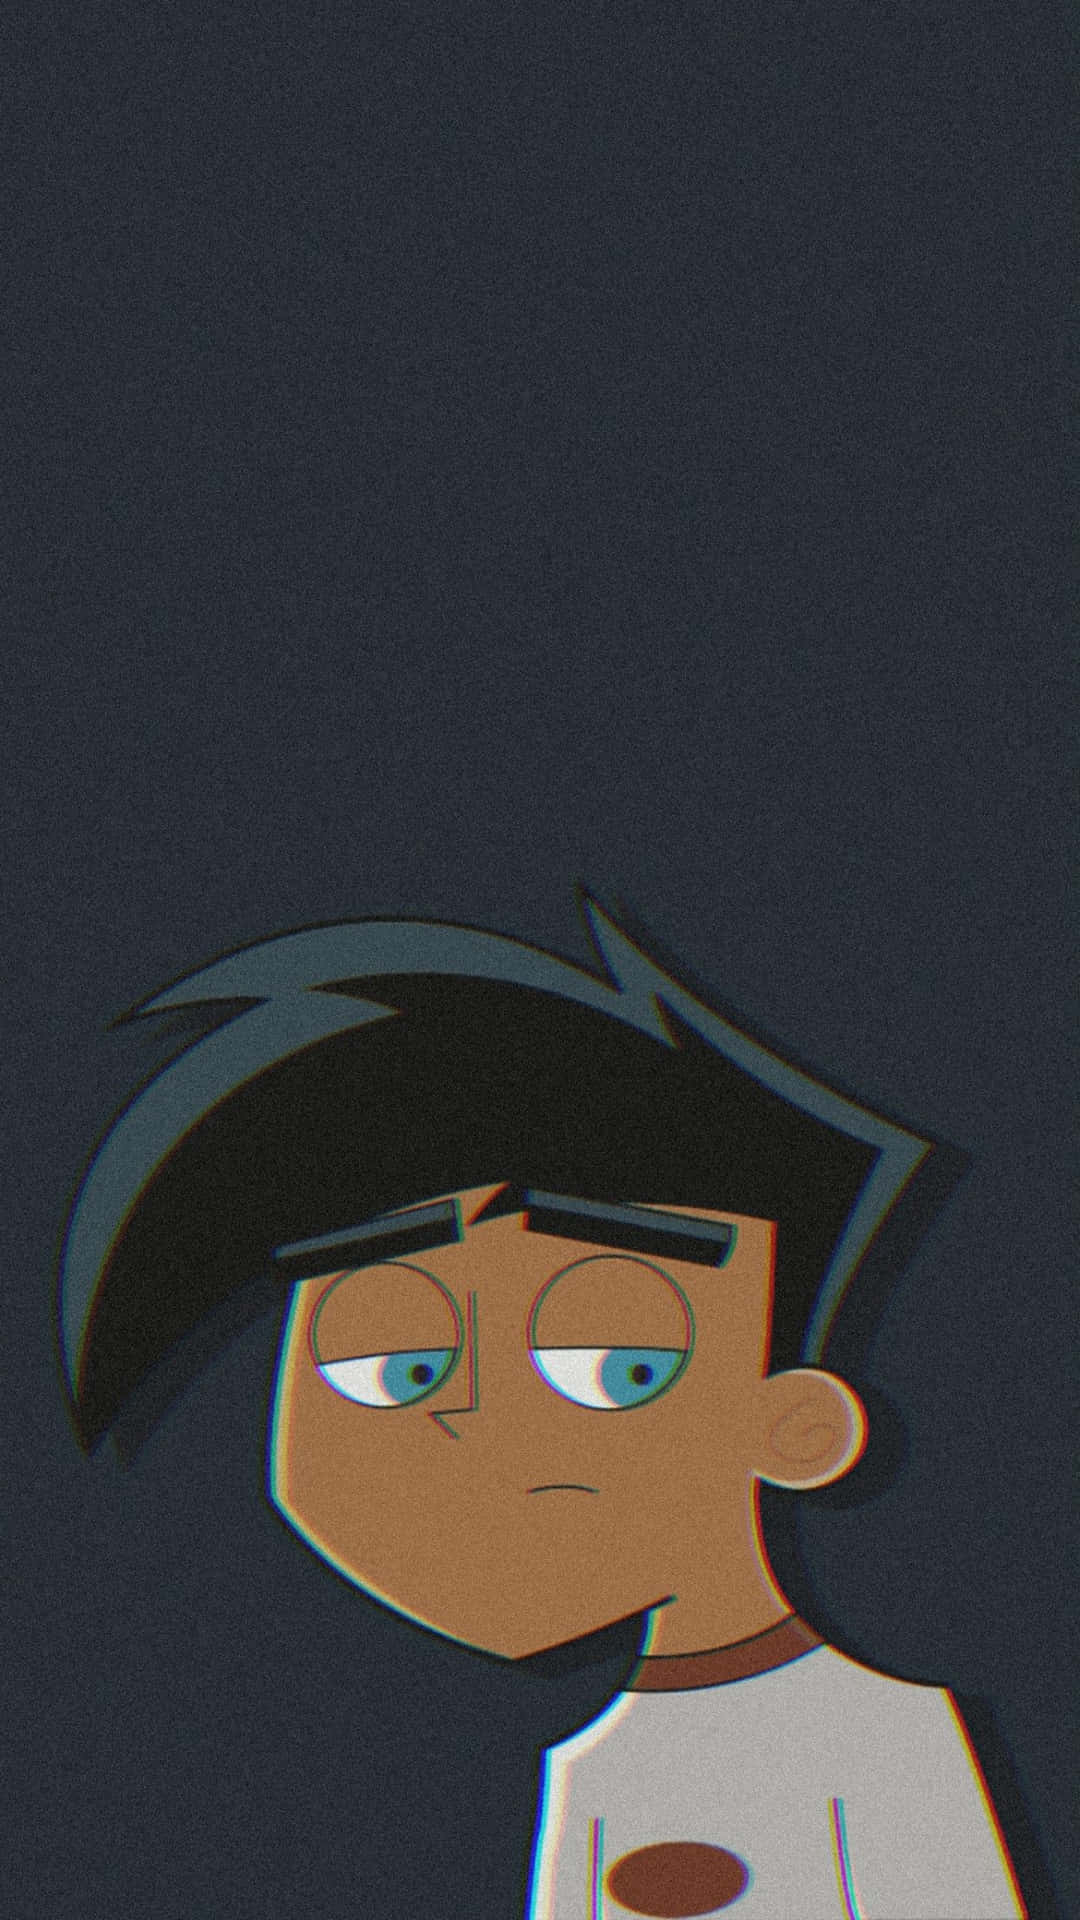 Danny Phantom - Stylish And Ready To Save The Day Background